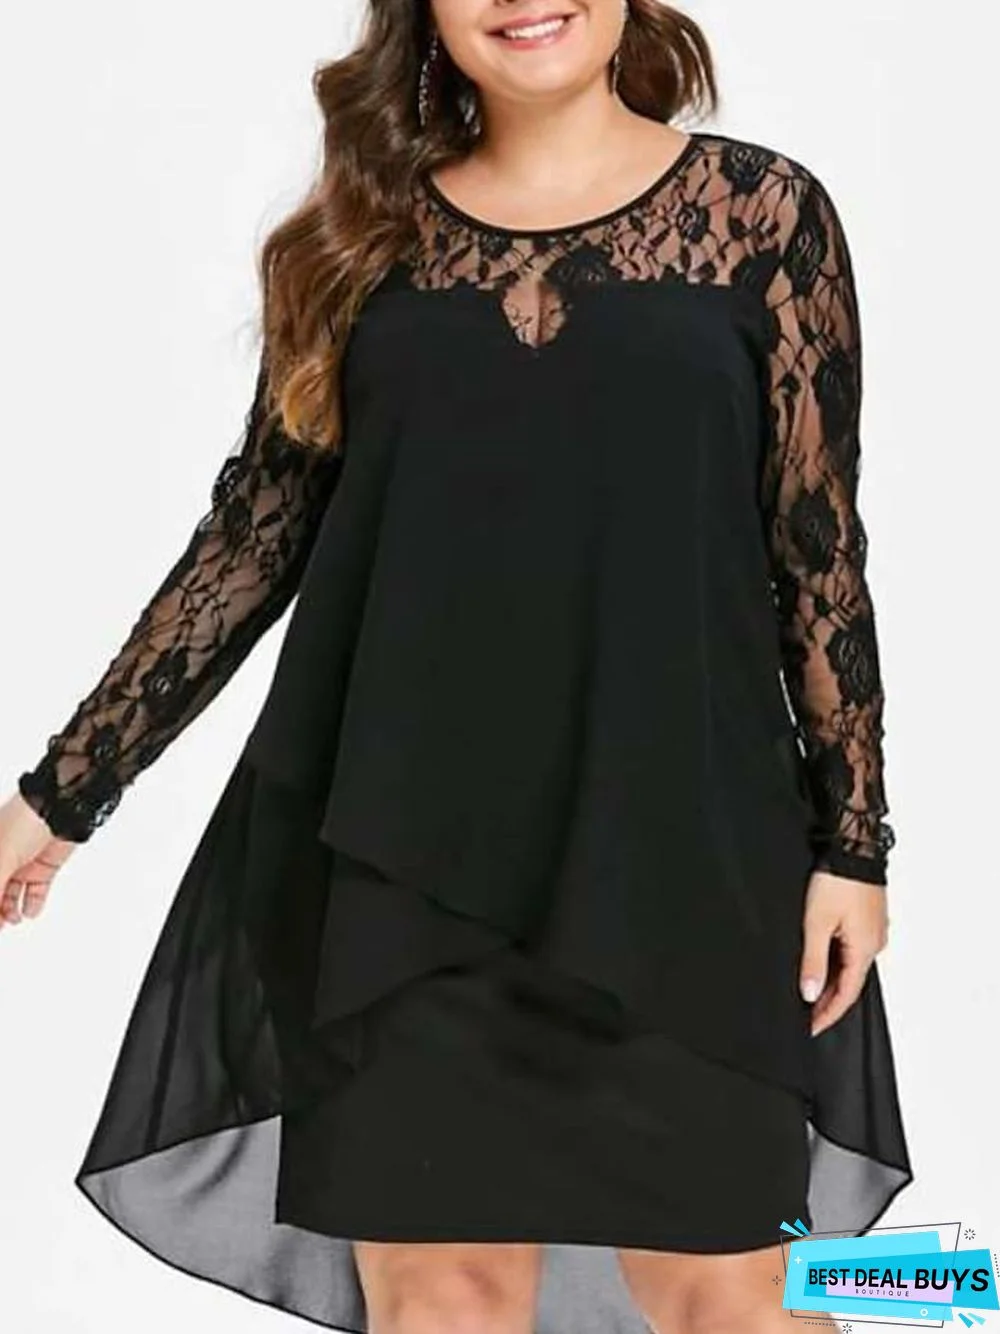 Women's Plus Size Party Dress Solid Color Crew Neck Lace Long Sleeve Winter Fall Stylish Elegant Mini Dress Party Date Dress